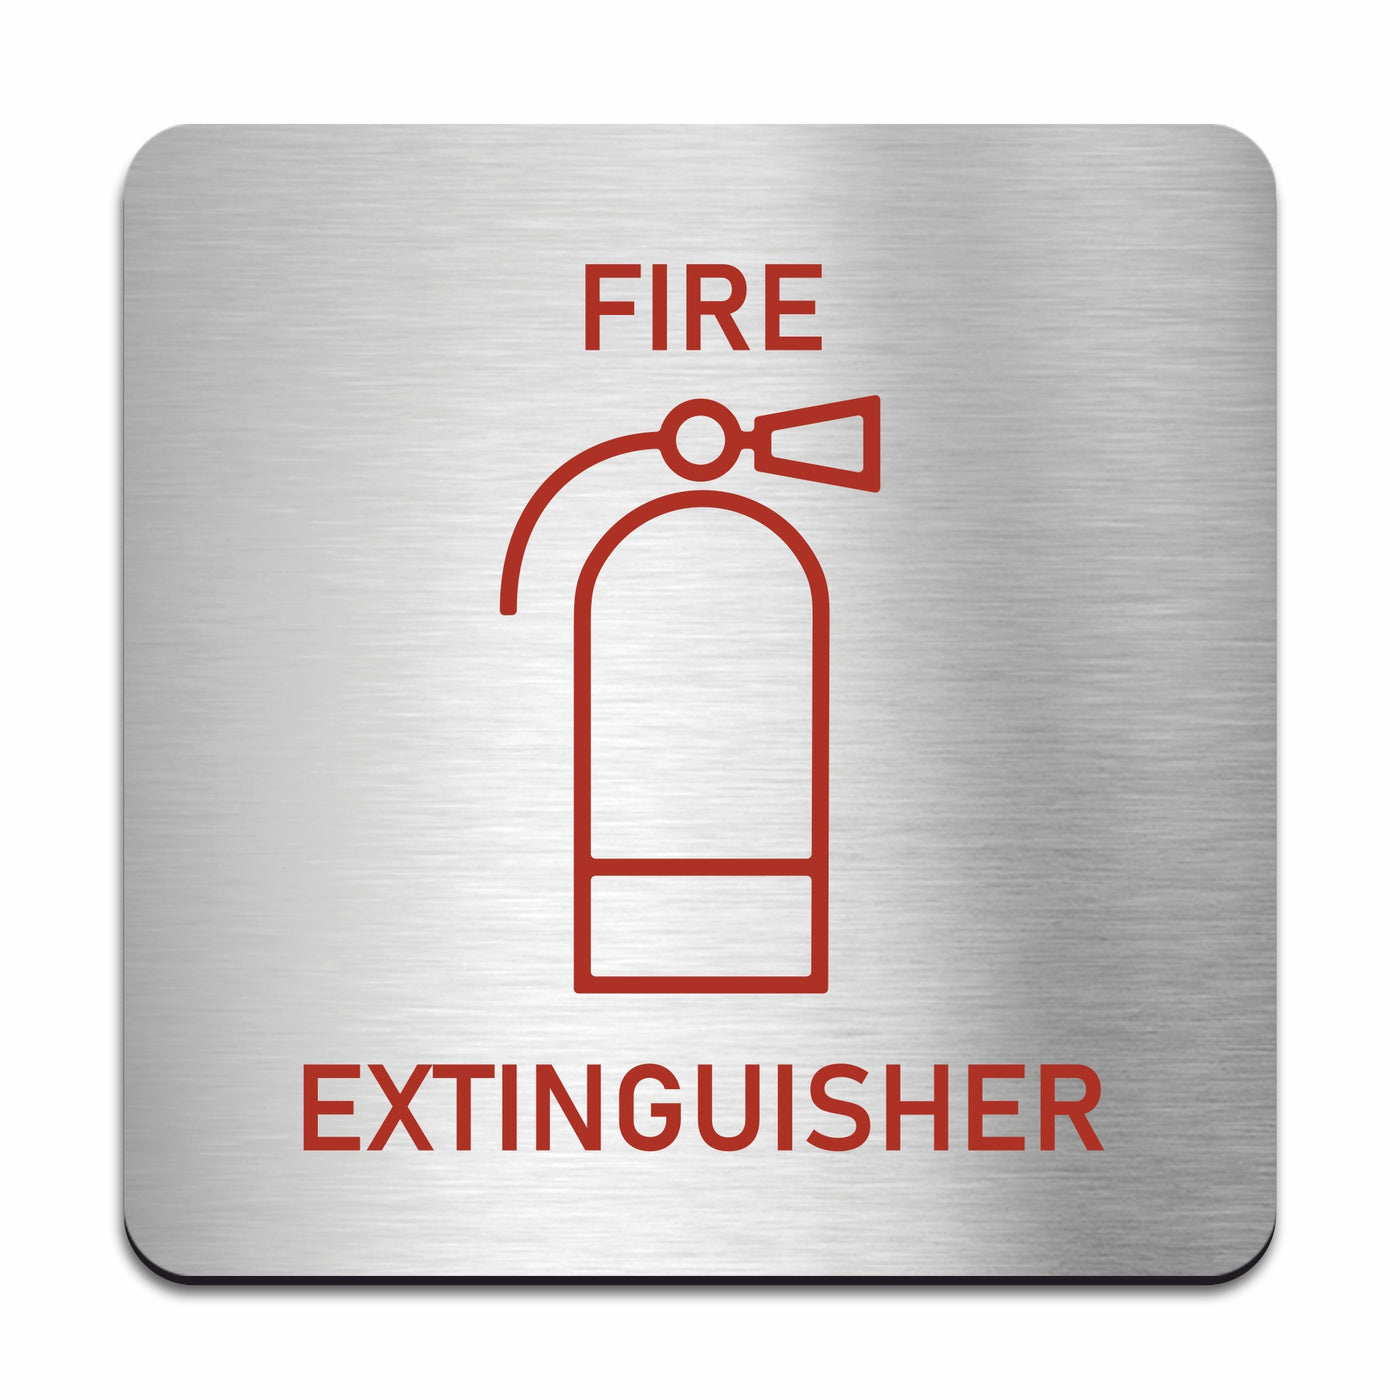 Fire Extinguisher Safety Sign - Stainless steel